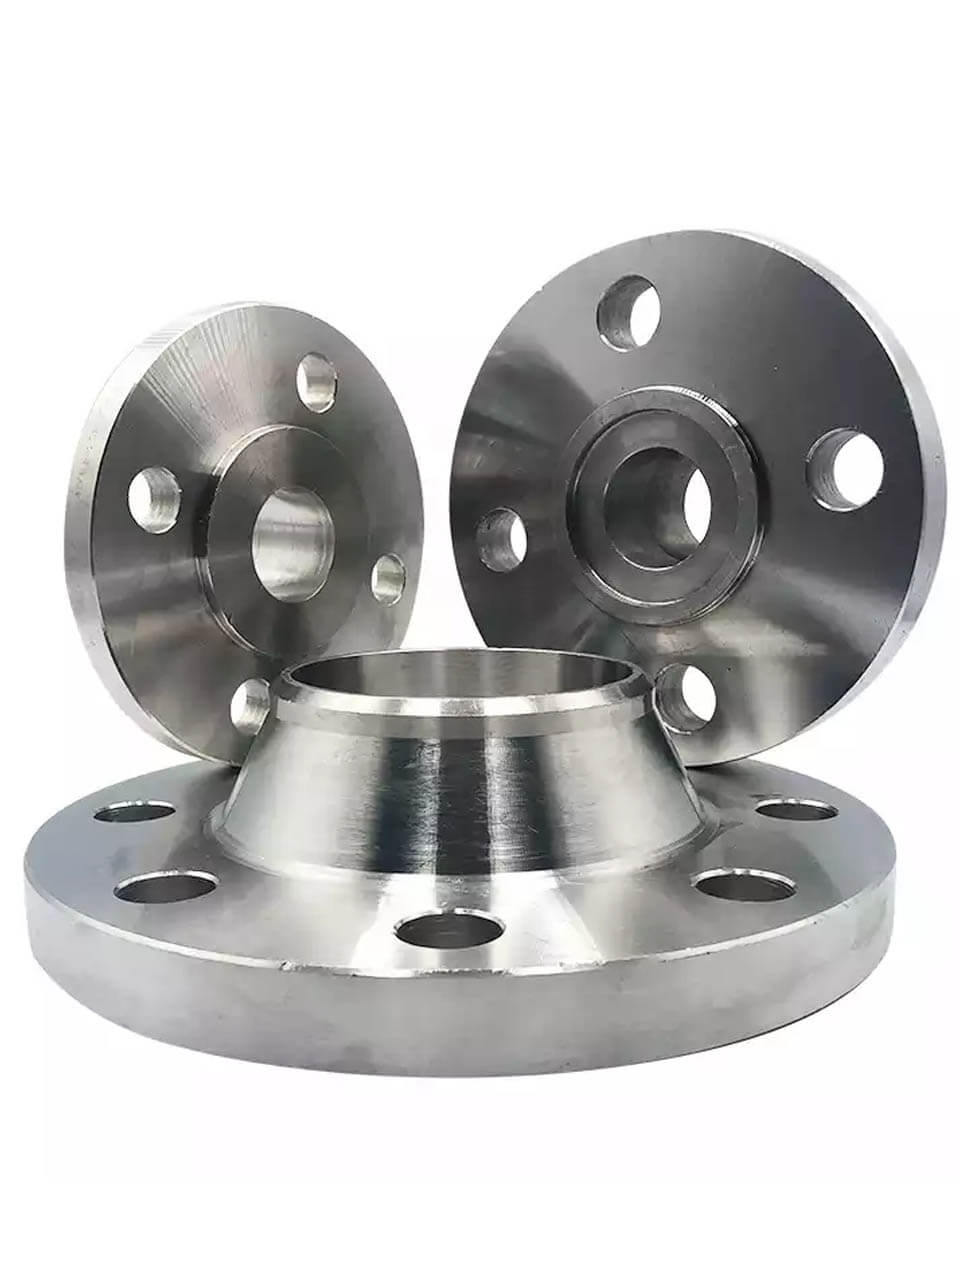  SS 446 Orifice Flanges Suppliers